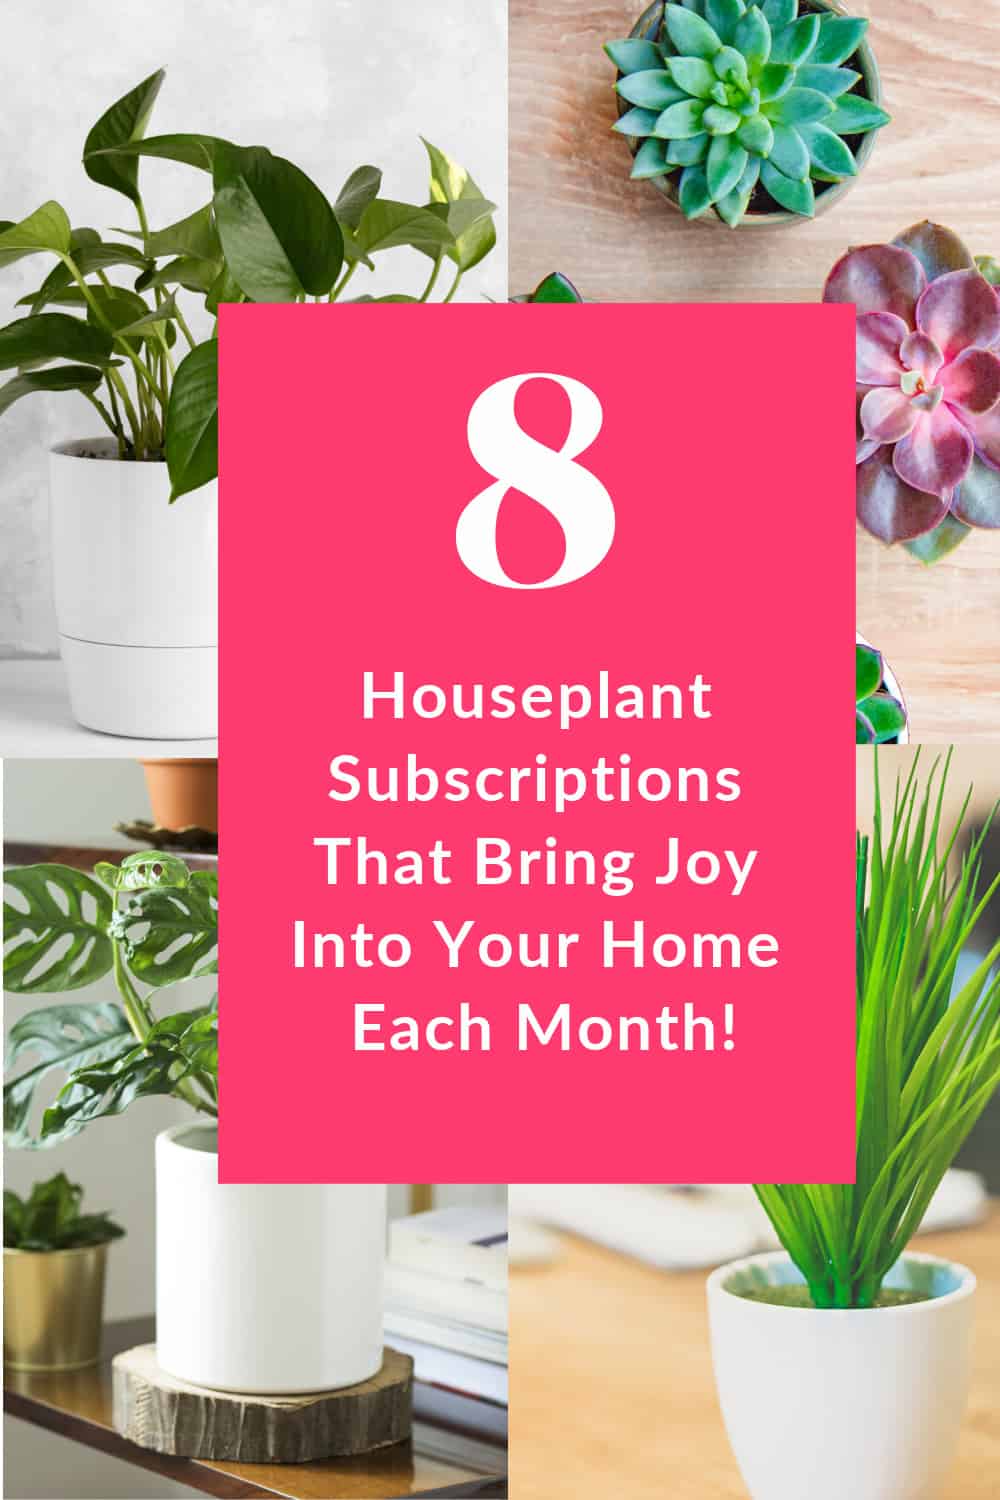 Want to bring a little more joy into your home each month? Grab one (or more) of these houseplant subscription services! From darling succulents to uncommon finds, they'll brighten up your home in a flash. Check them out!